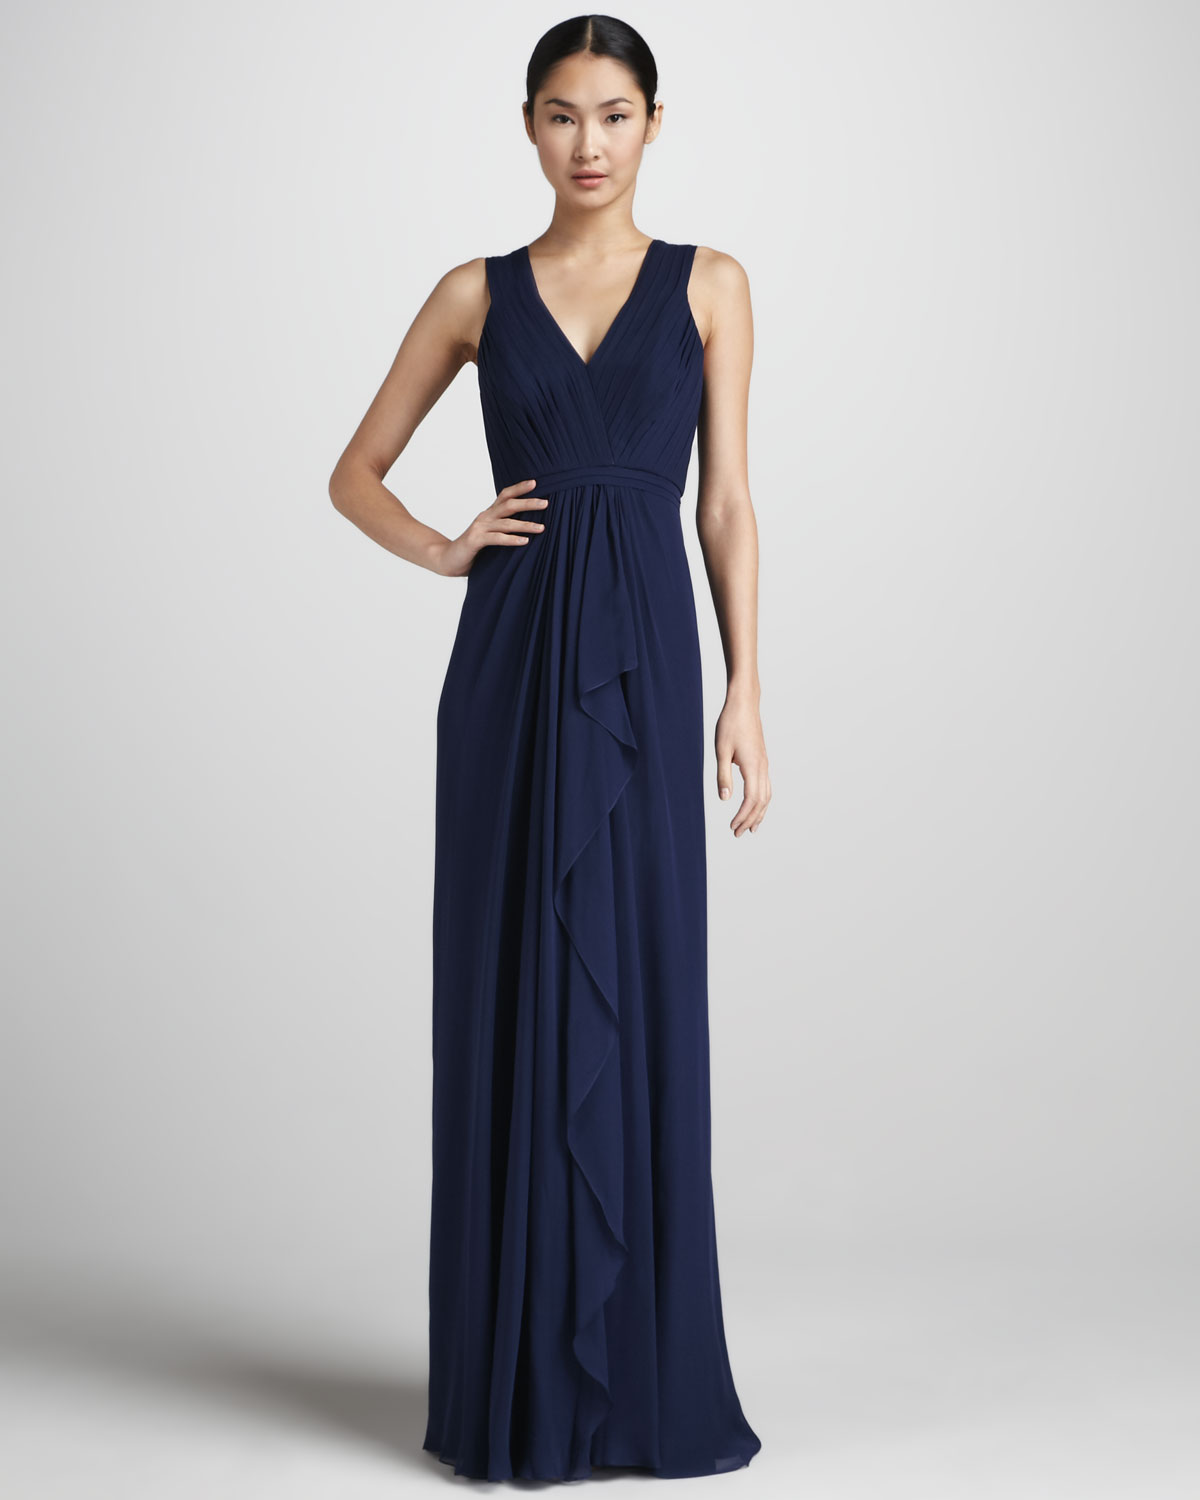 Lyst - Pamella roland Ruffle Front Chiffon Gown in Blue